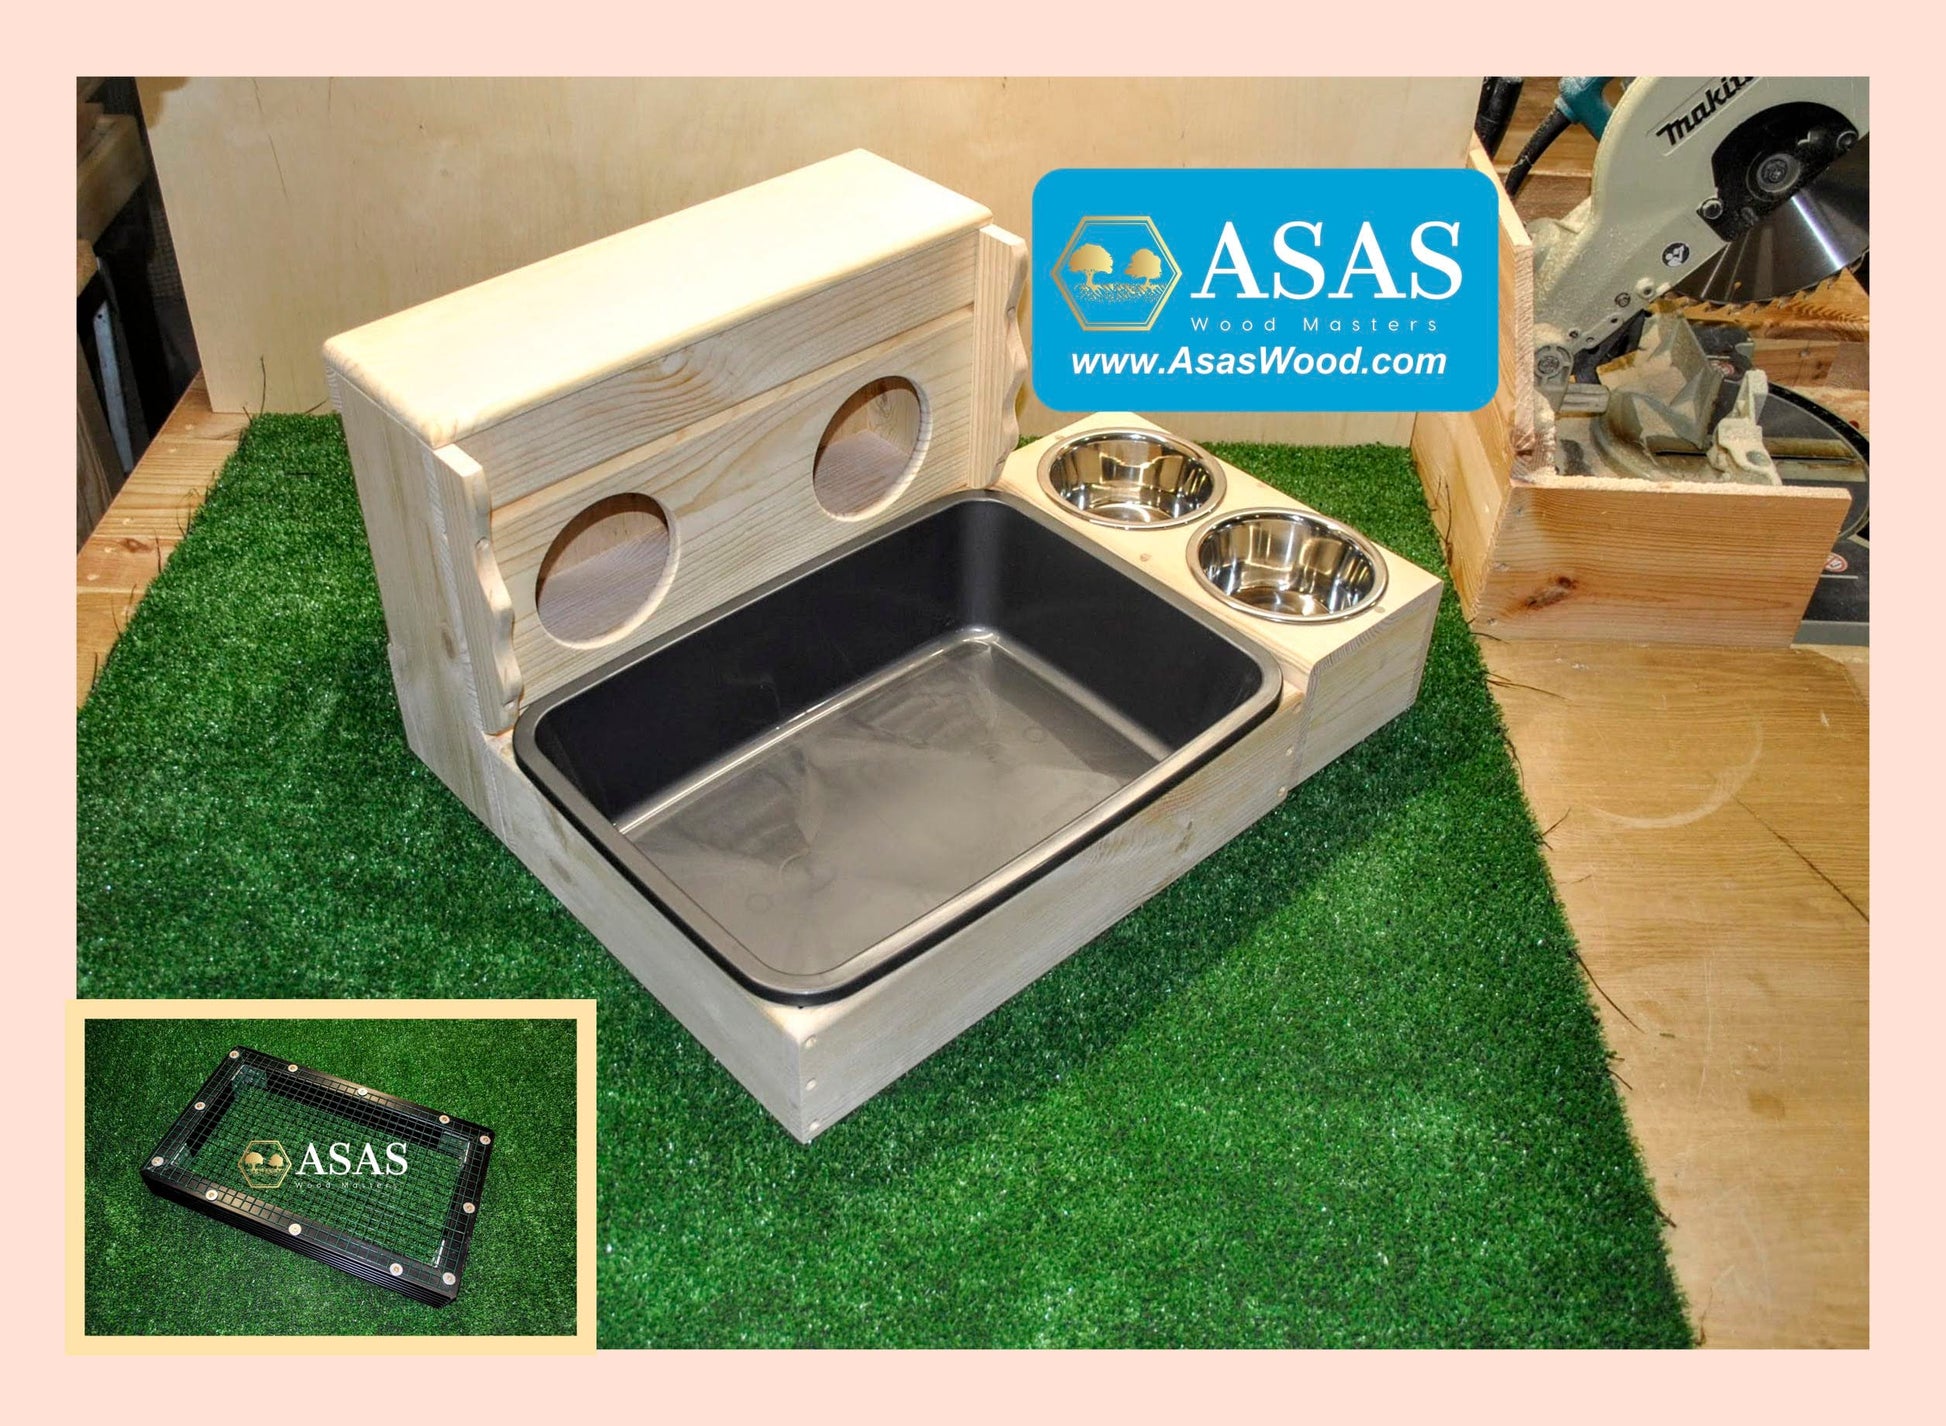 Wooden hay feeder with liter box for rabbit, wire mesh insert and food bowls, made by asaswood